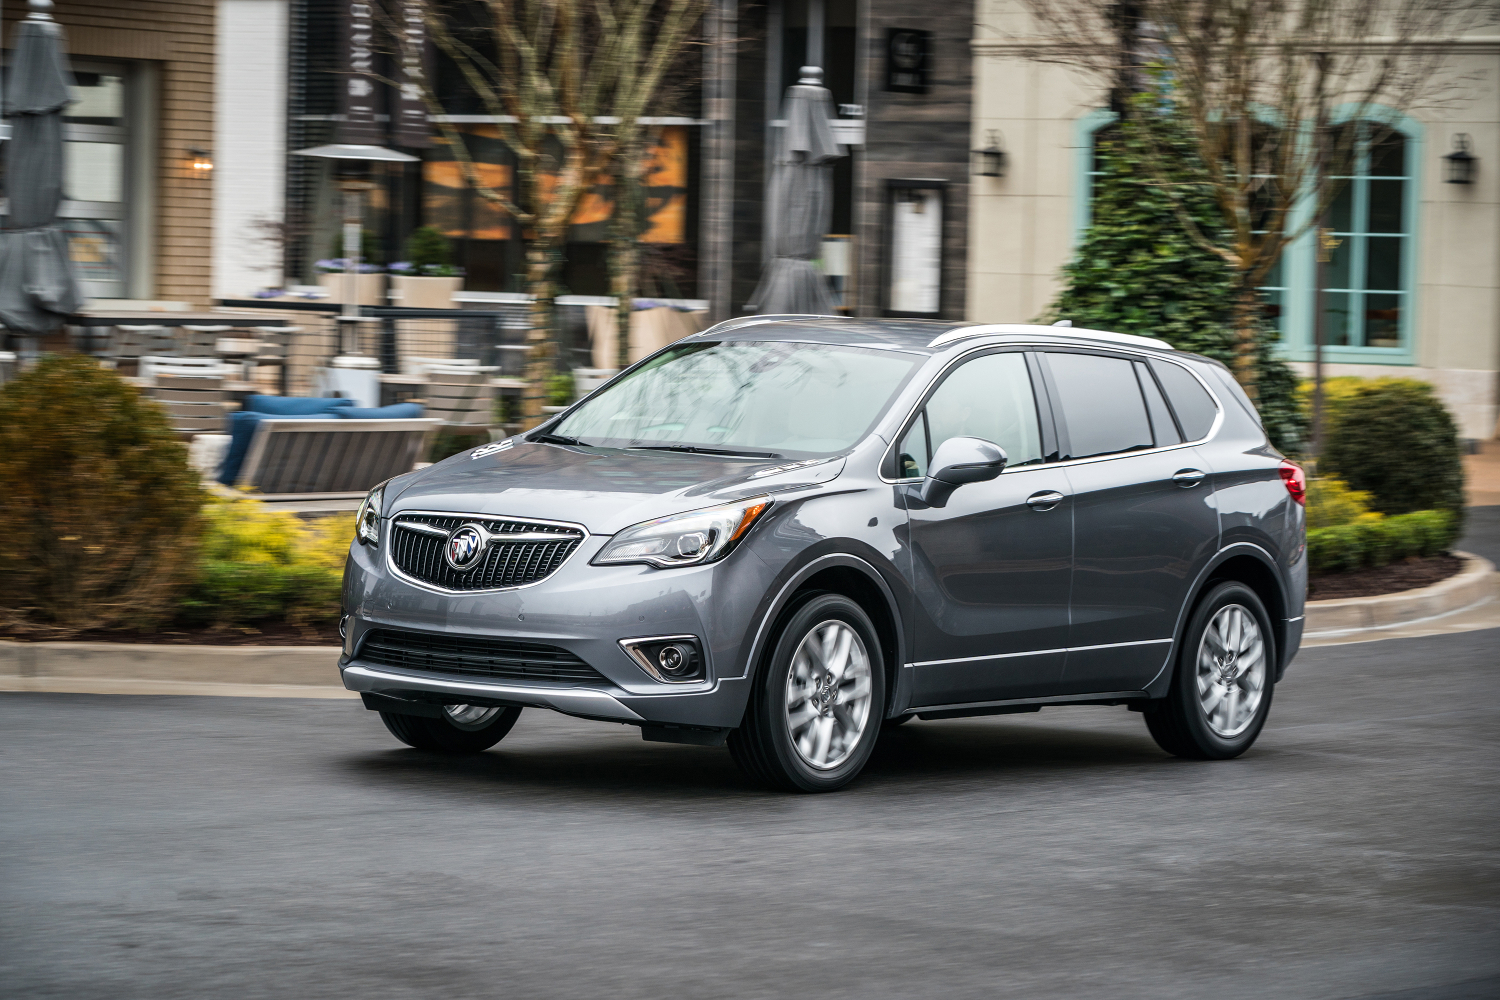 The 2019 Buick Envision is a reliable SUV according to Consumer Reports